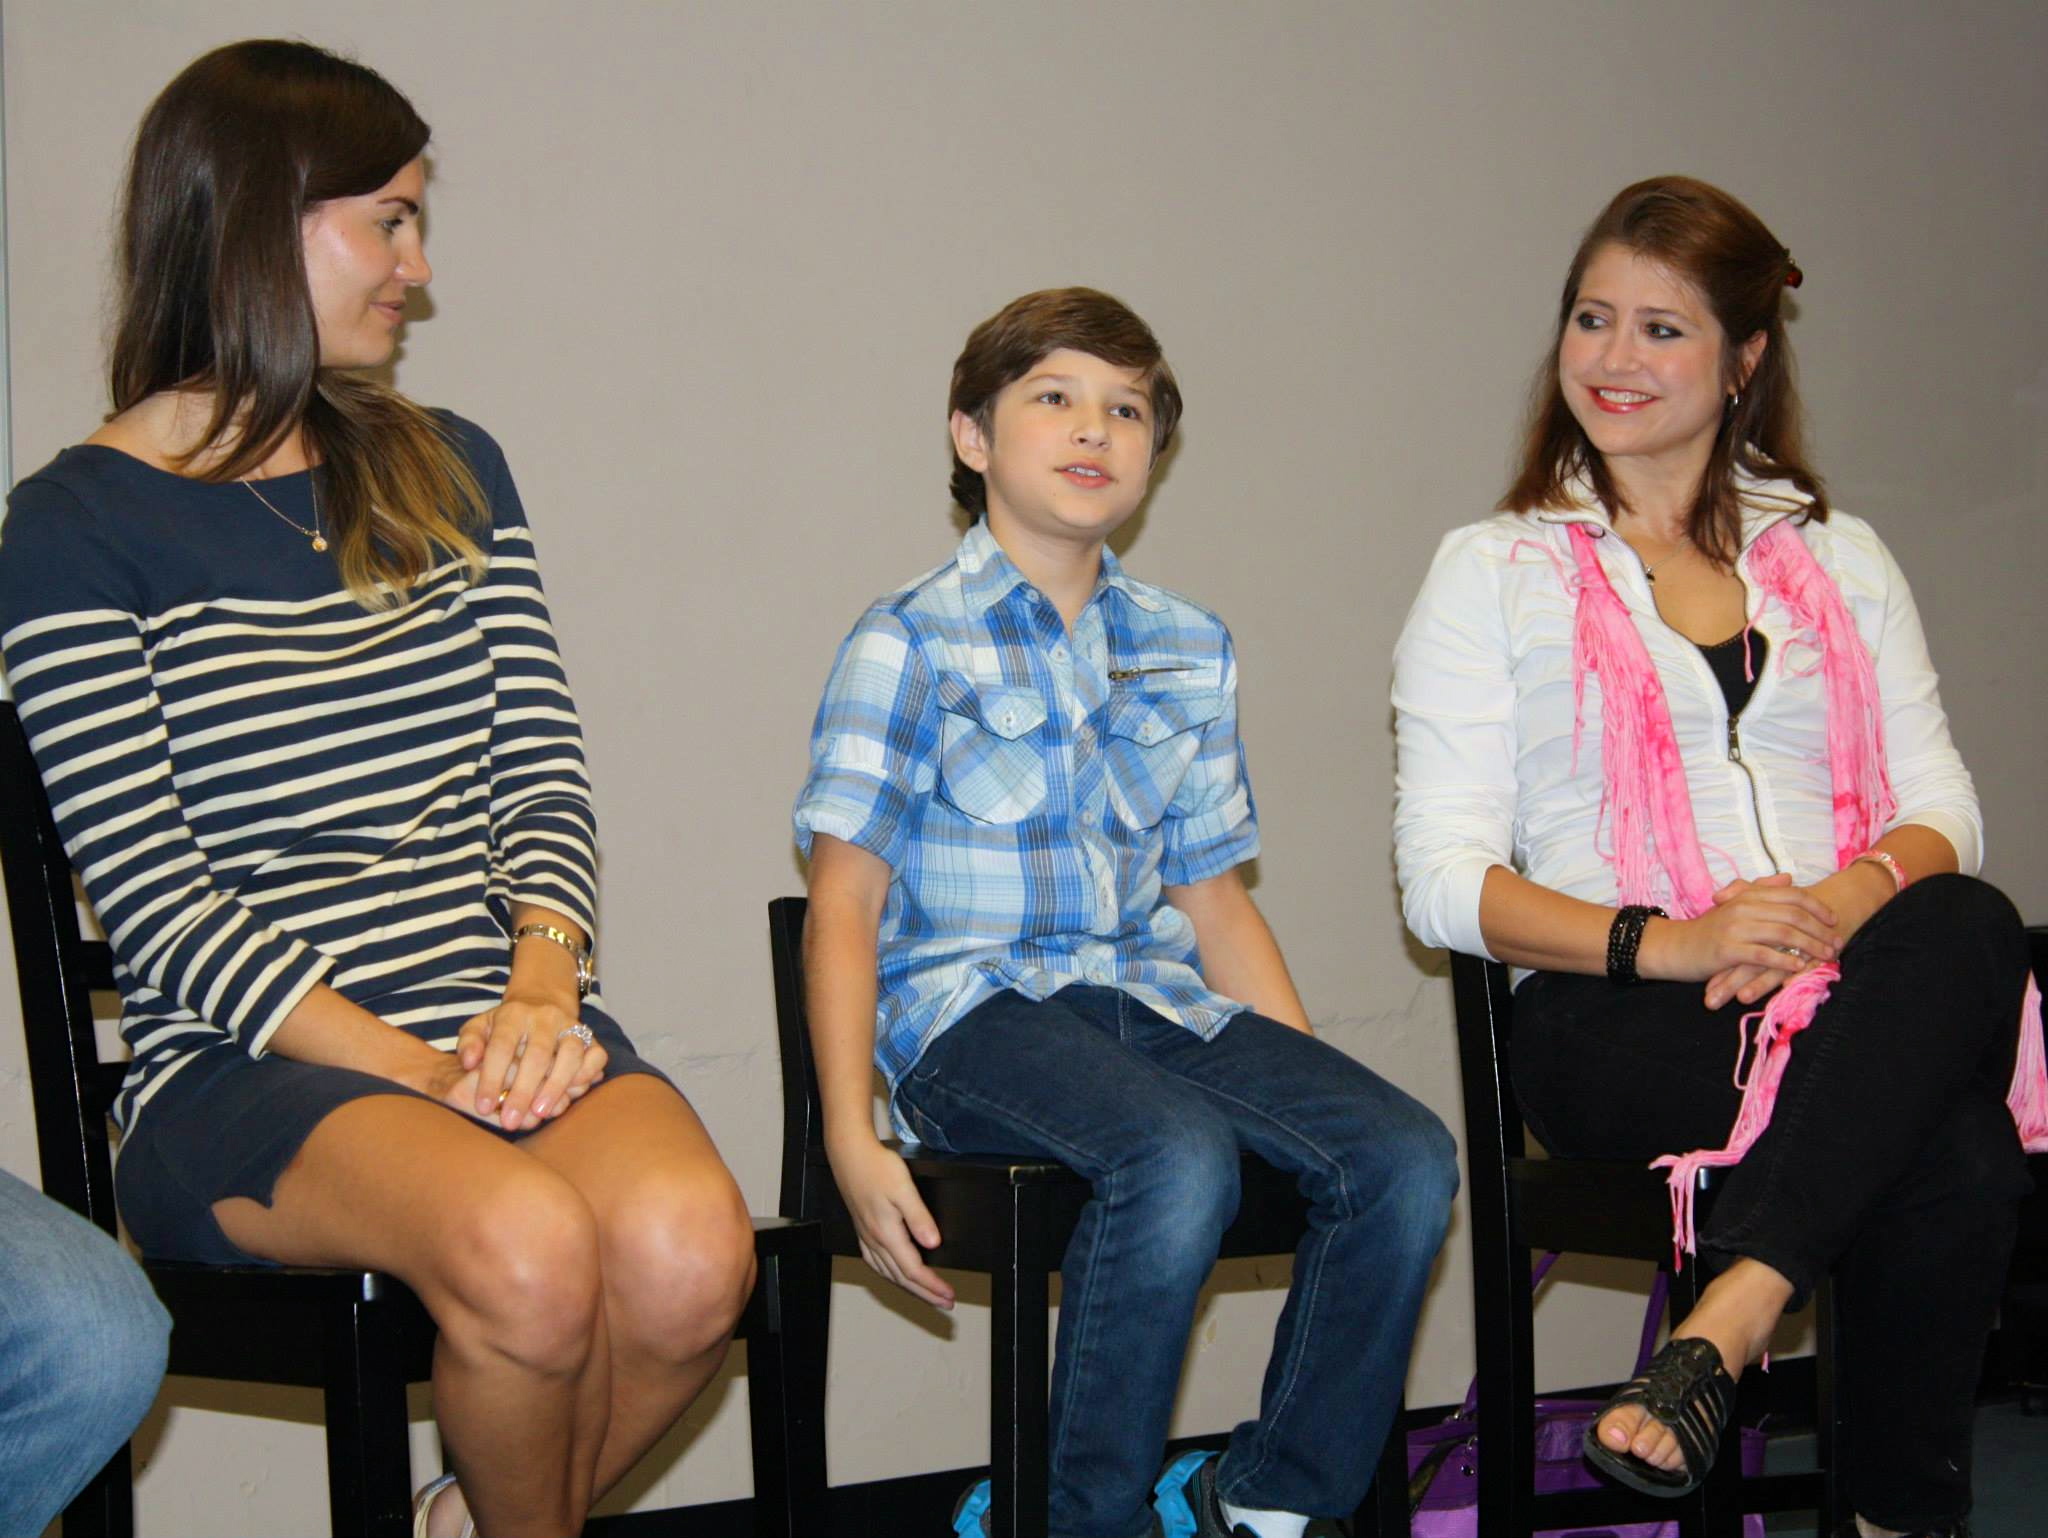 Blaze Tucker was requested to speak on the panel of a SAG AFTRA workshop to inspire and support other kids interested in acting.